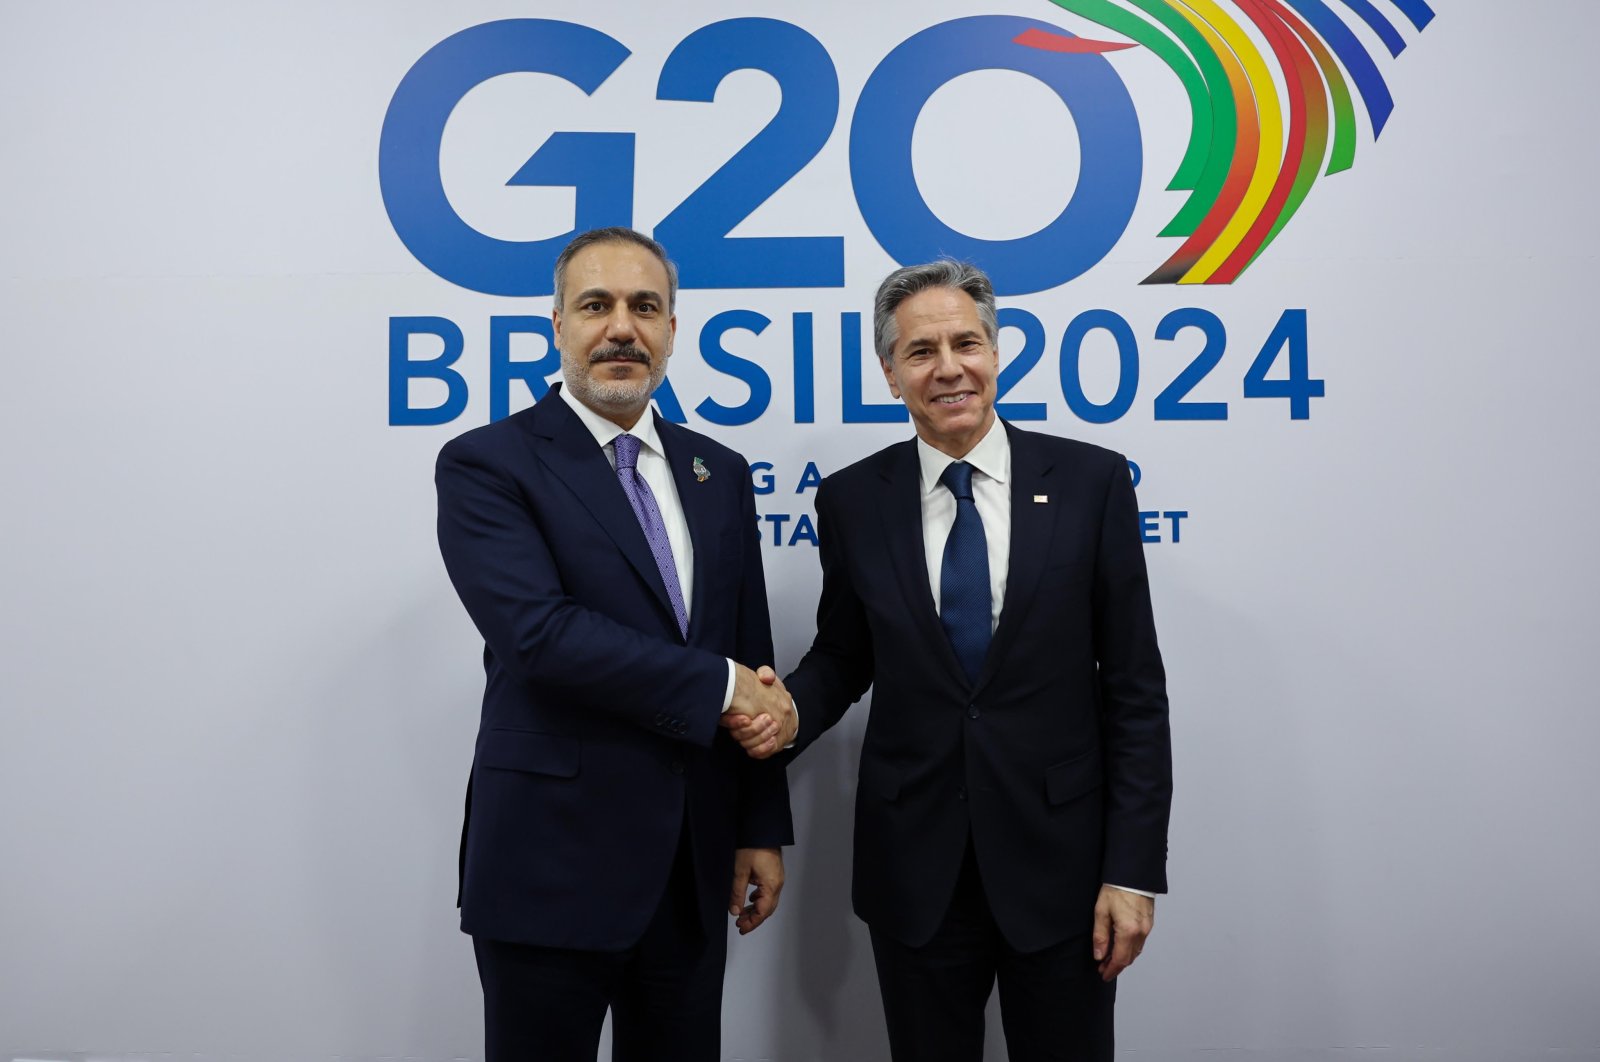 Foreign Minister Hakan Fidan (L) shakes hands with U.S. Secretary of State Antony Blinken on the sidelines of a G-20 summit in Rio de Janeiro, Brazil, Feb. 22, 2024. (DHA Photo)